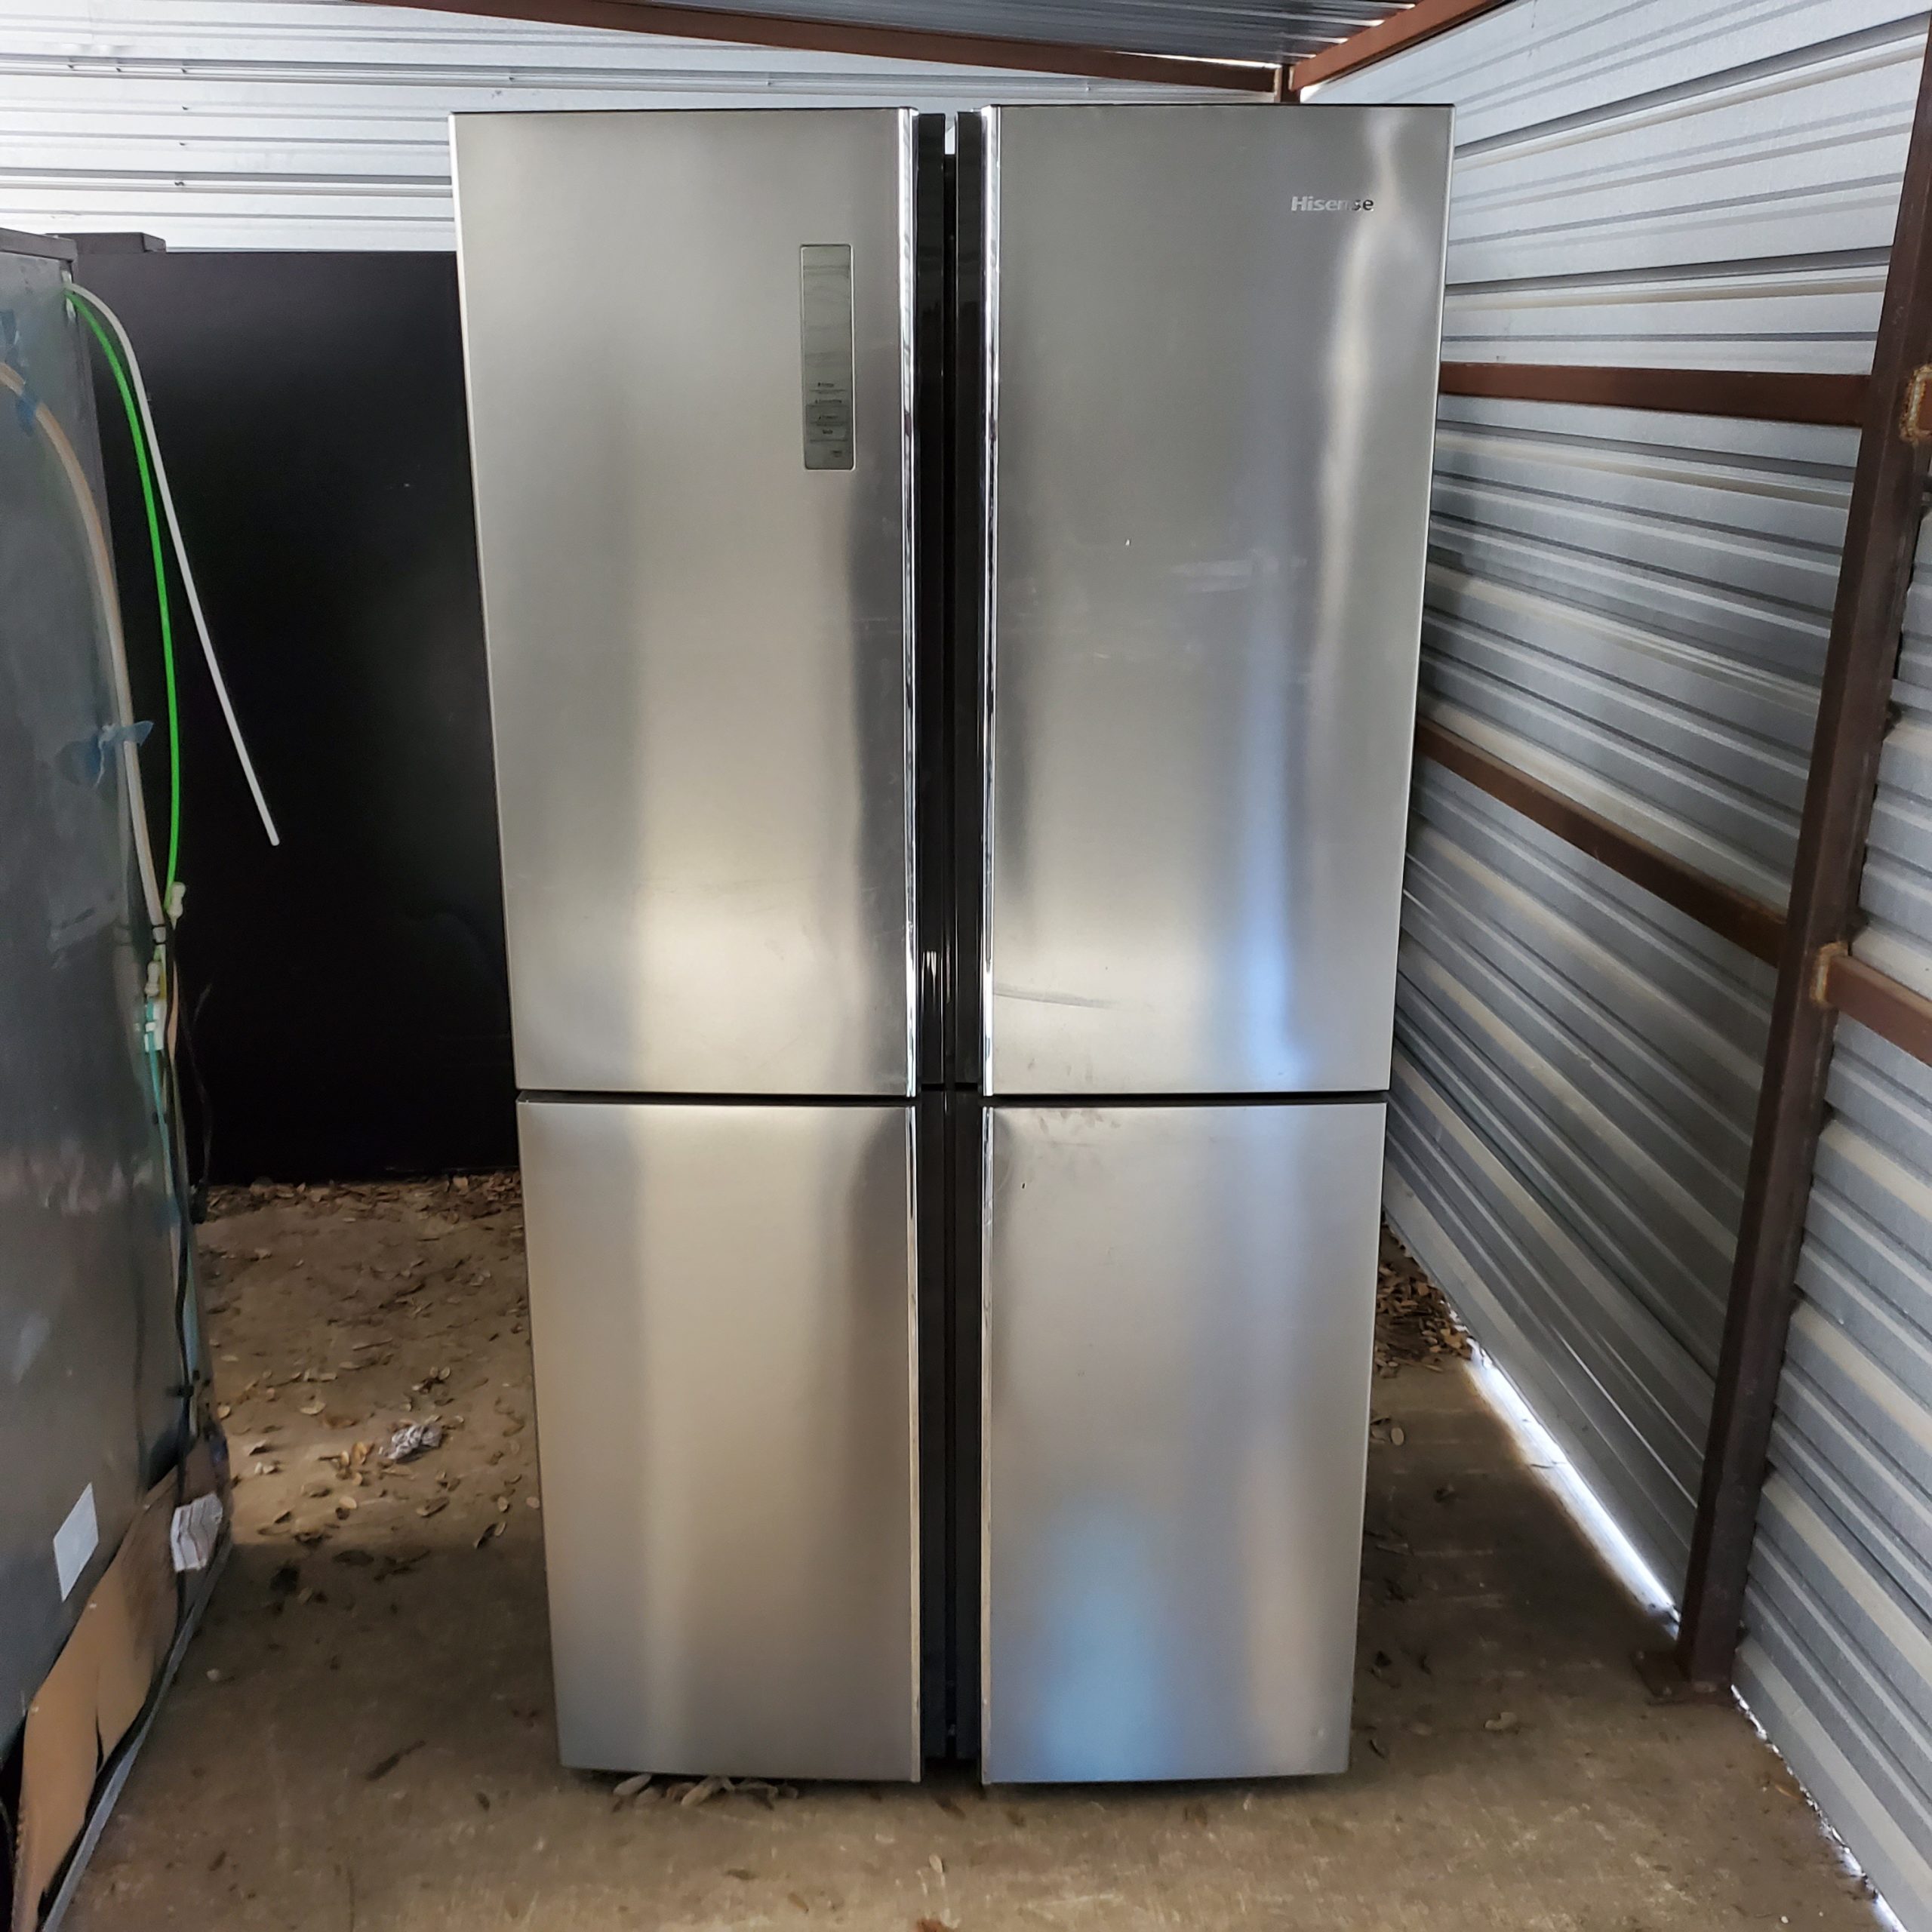 example picture of Hisense Stainless Steel French door refrigerator from our Salvage program.